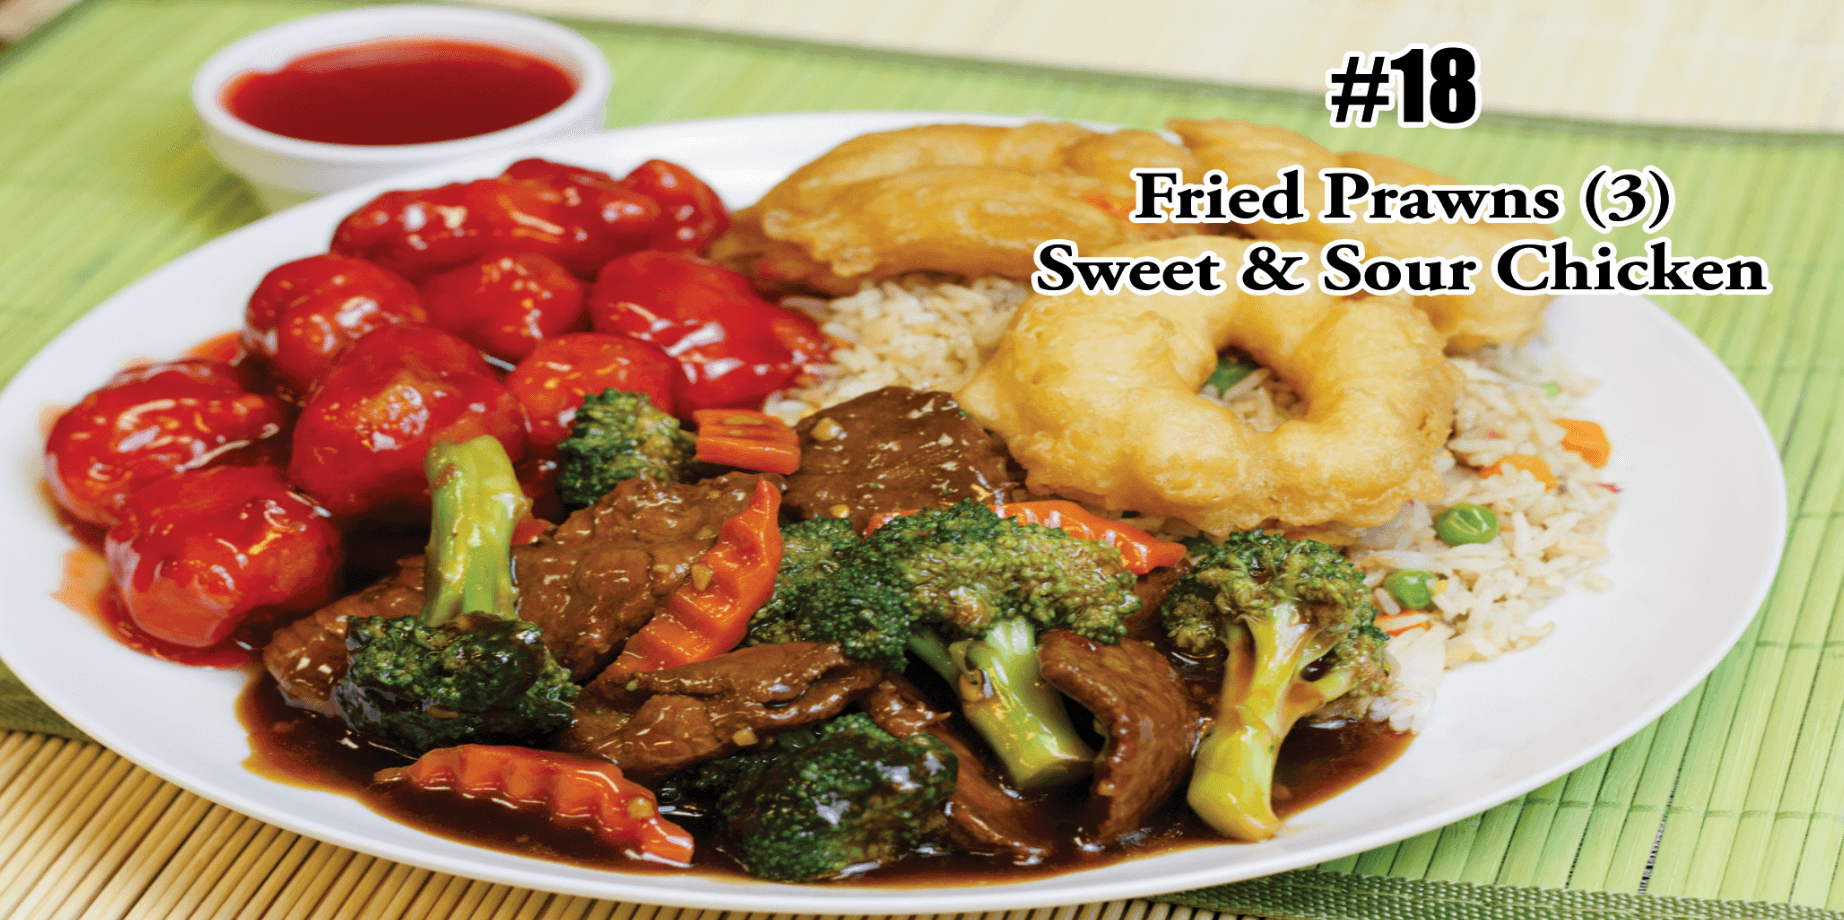 C18. Fried Prawns, Broccoli Beef Sweet Sour Chicken Combo